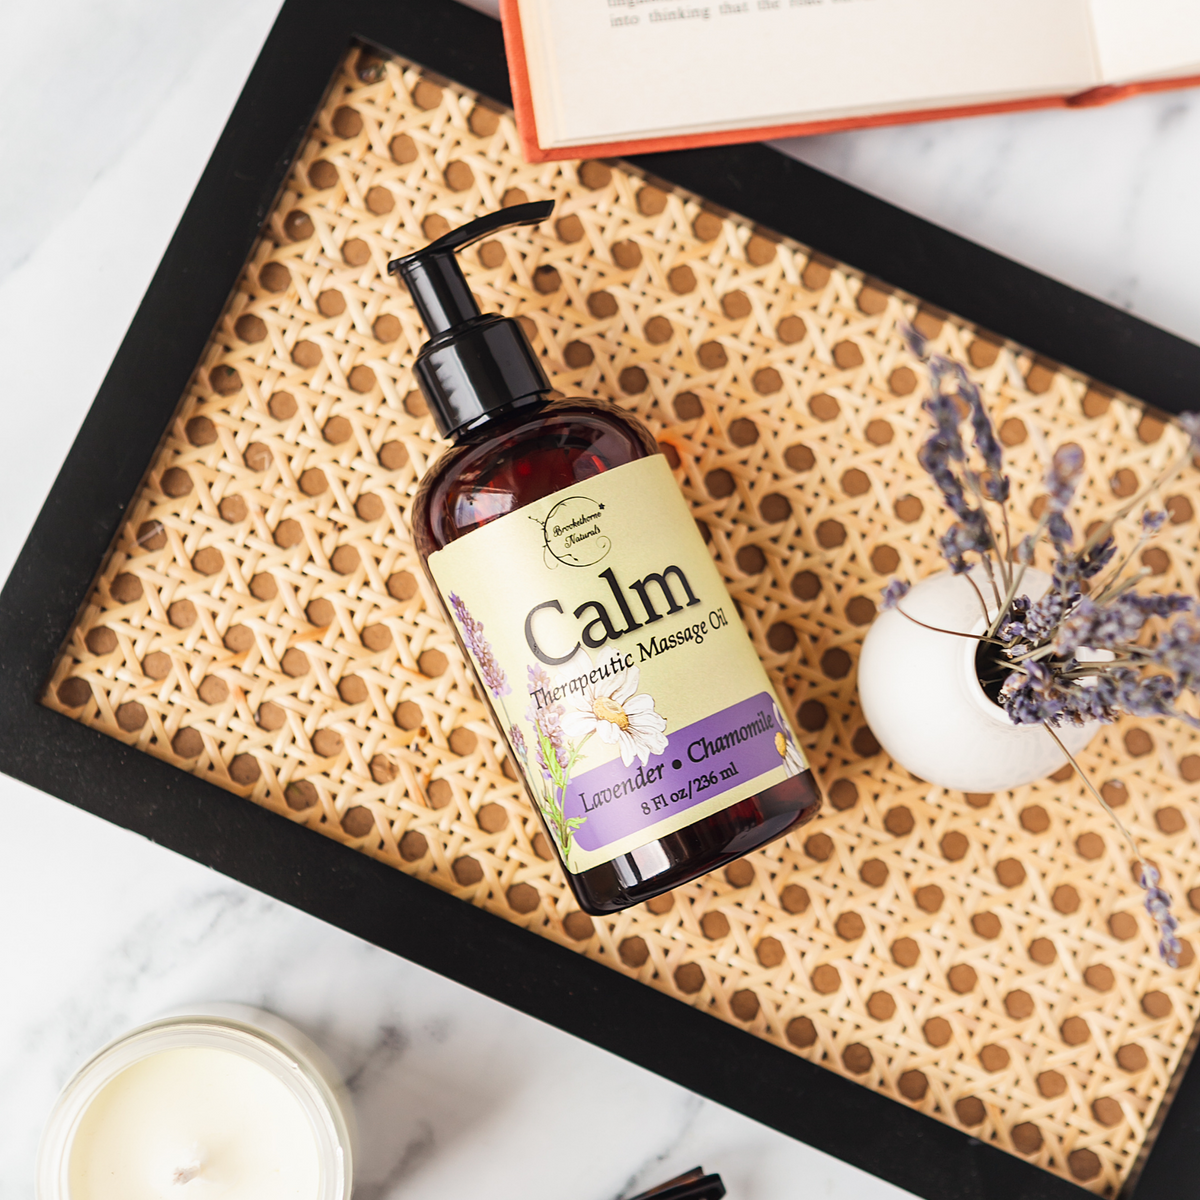 Calm Therapeutic Massage Oil on wicker tray with lavender flowers